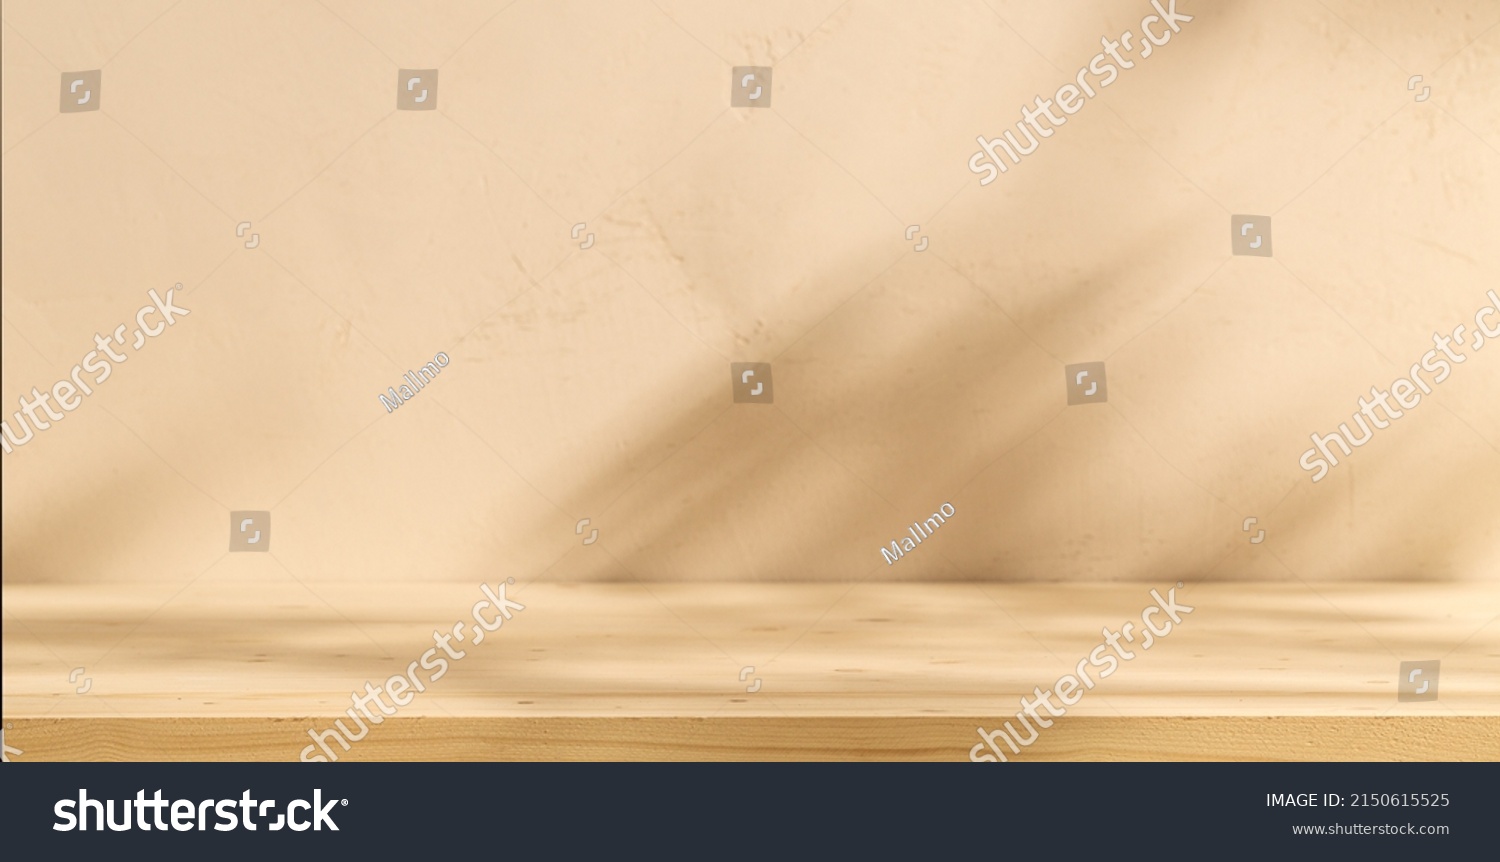 Mock up for presentation, branding products, cosmetics, food or jewellery. Empty table on bright brown wall background. Composition with leaves shadow on the wall and wooden desk.  #2150615525